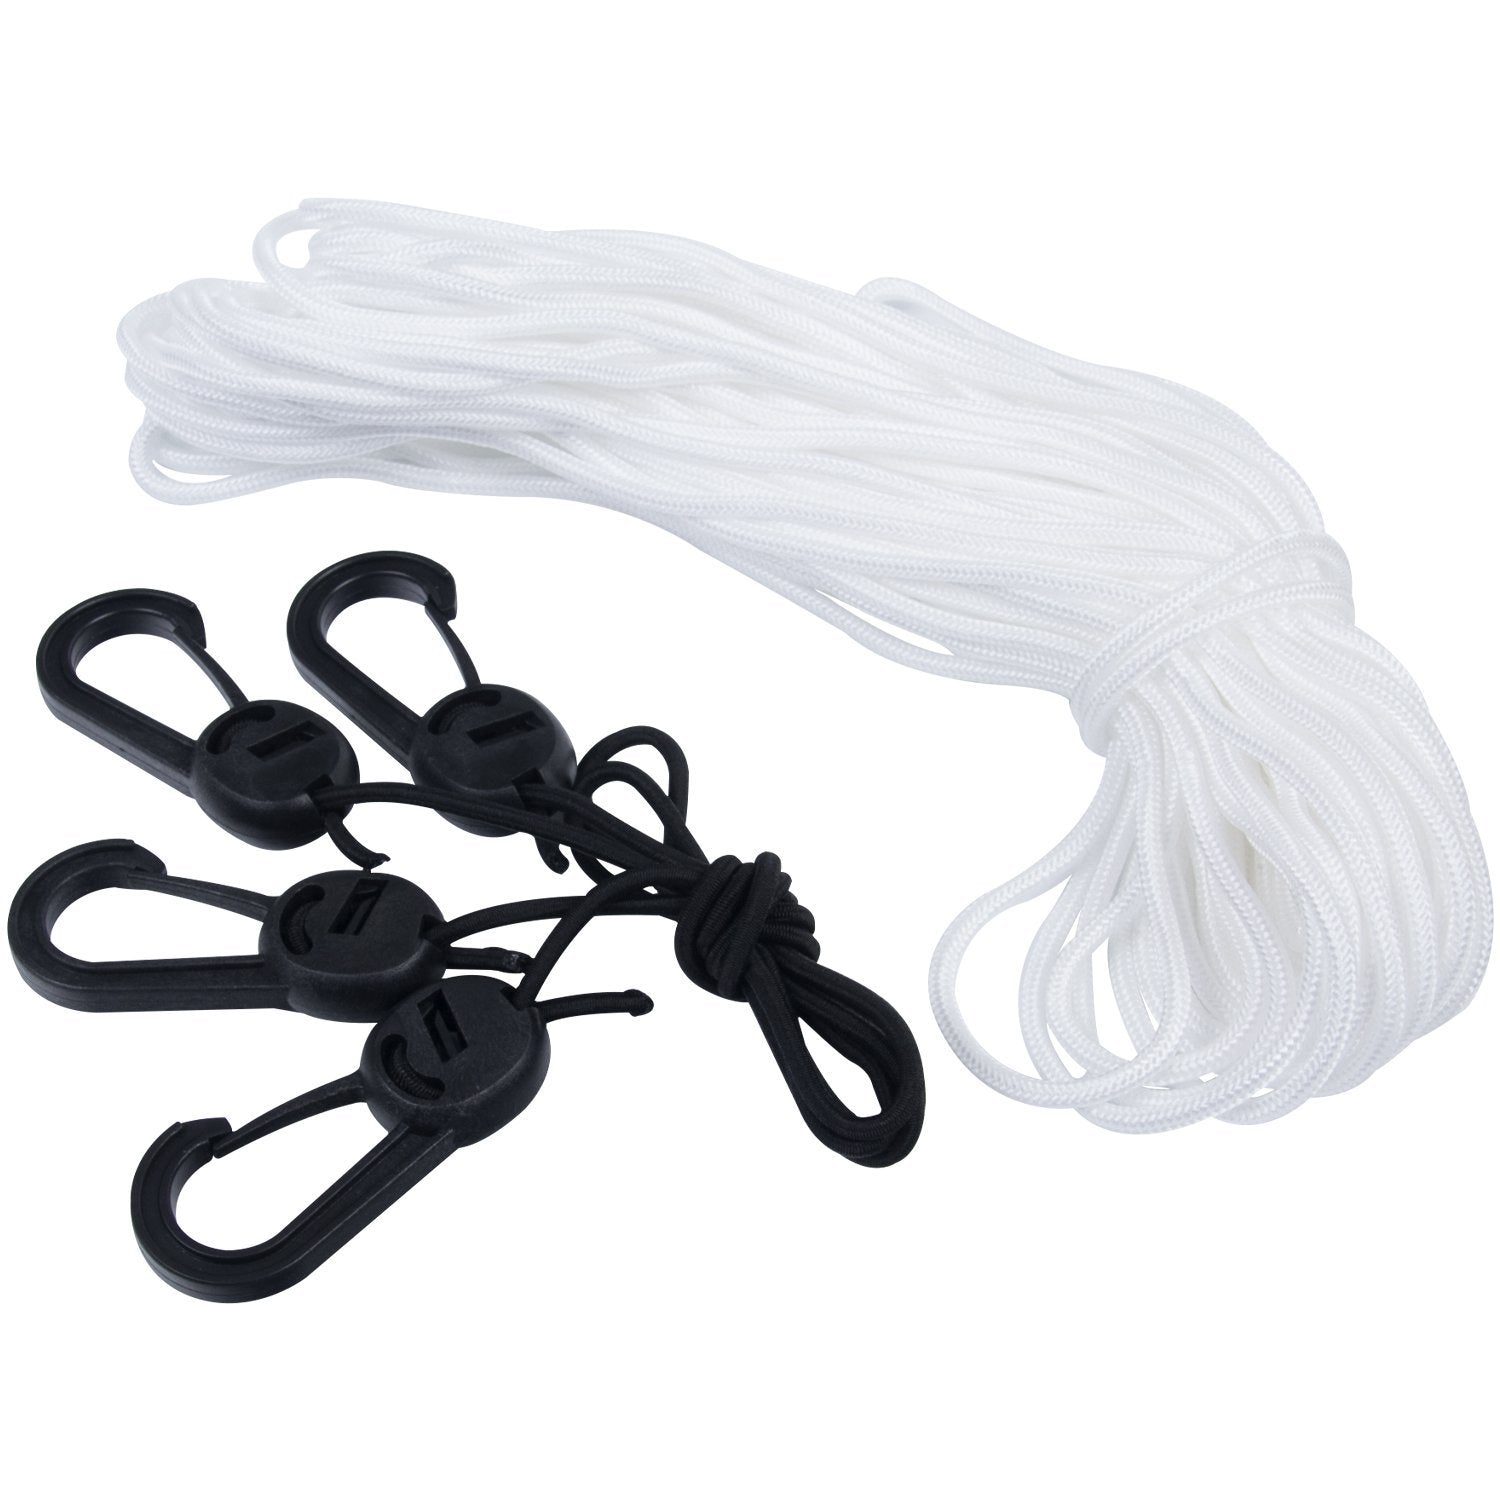 GOODSMANN Boat Cover Tie Down Kit, Durable Tie Down Straps, Rope & Hoo -  Venus Manufacturing